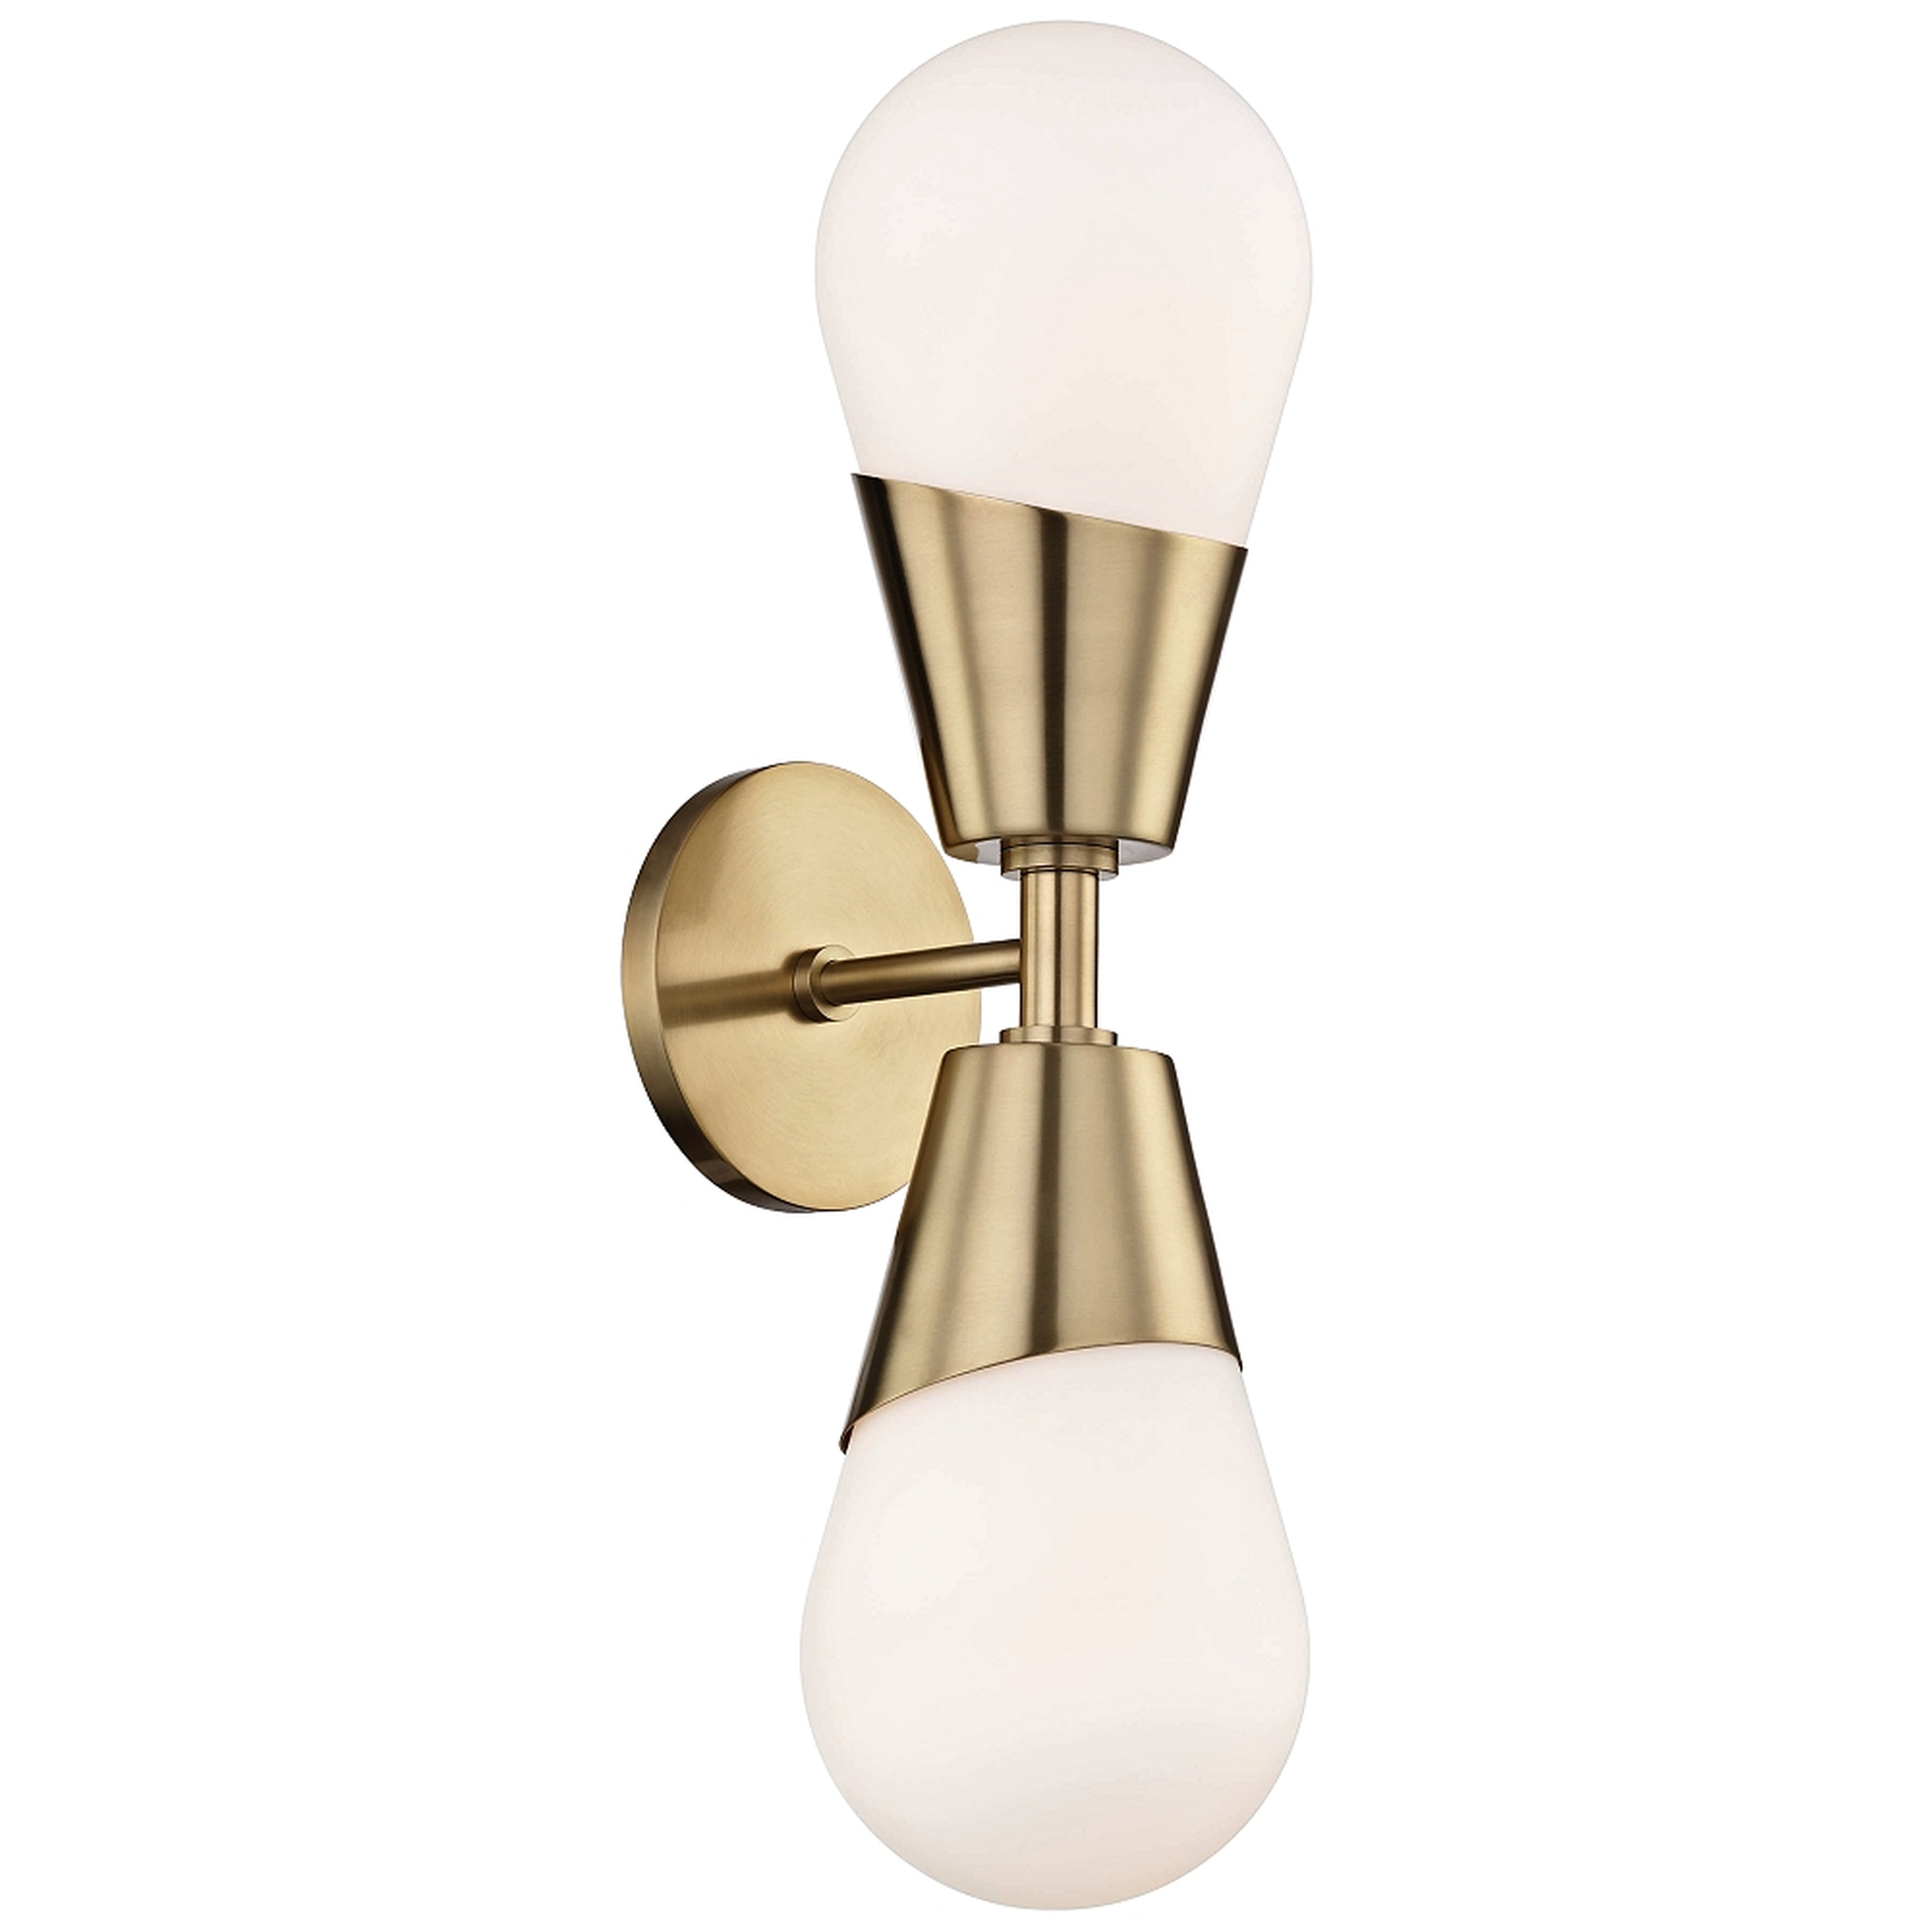 Mitzi Cora 18 3/4" High Aged Brass 2-Light Wall Sconce - Style # 46D14 - Lamps Plus